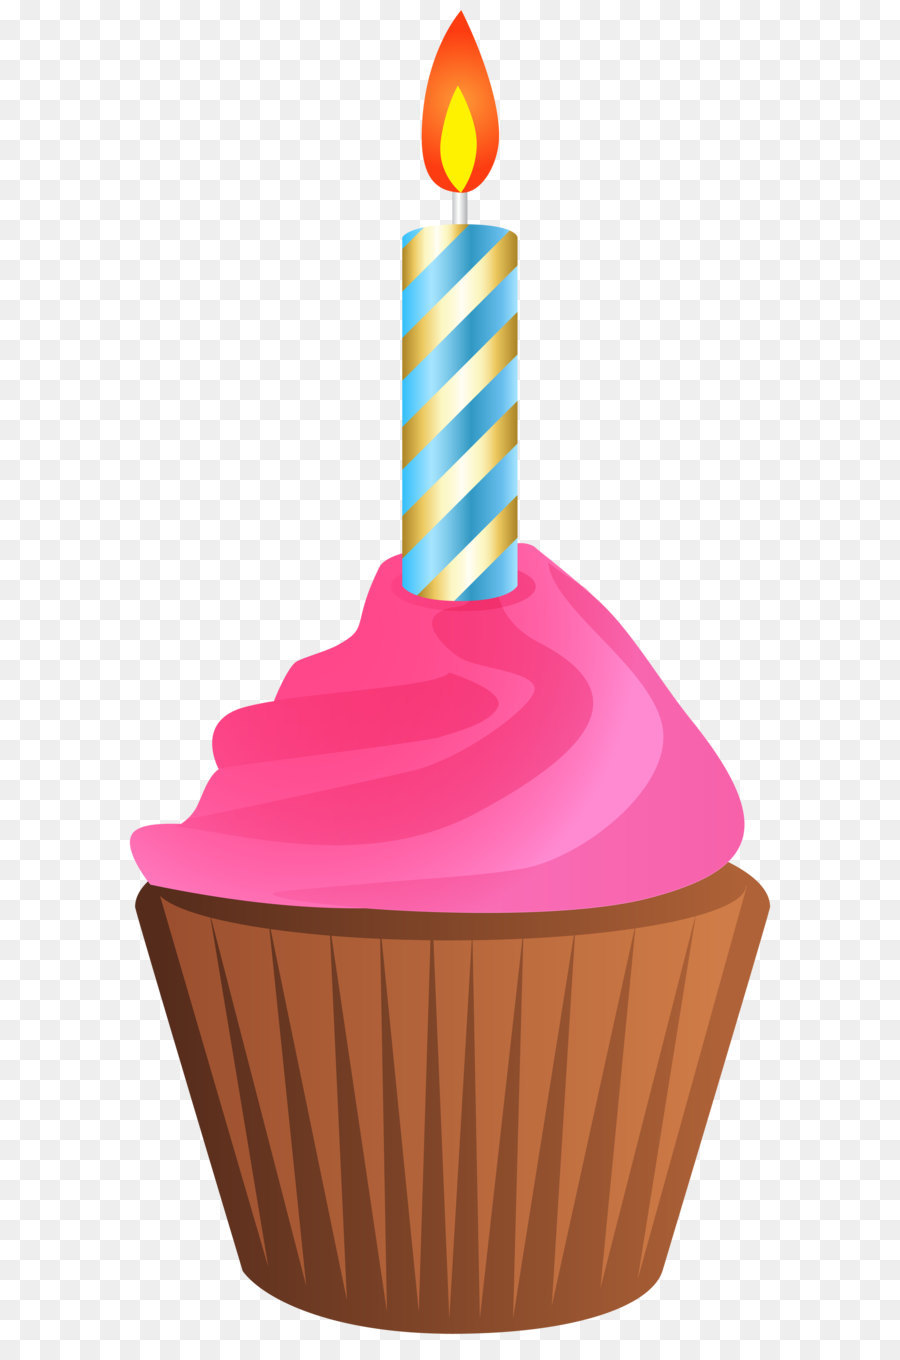 Muffin Birthday cake Cupcake Clip art - Birthday Muffin with Candle Transparent Clip Art Image png download - 3869*8000 - Free Transparent Birthday Cake png Download.